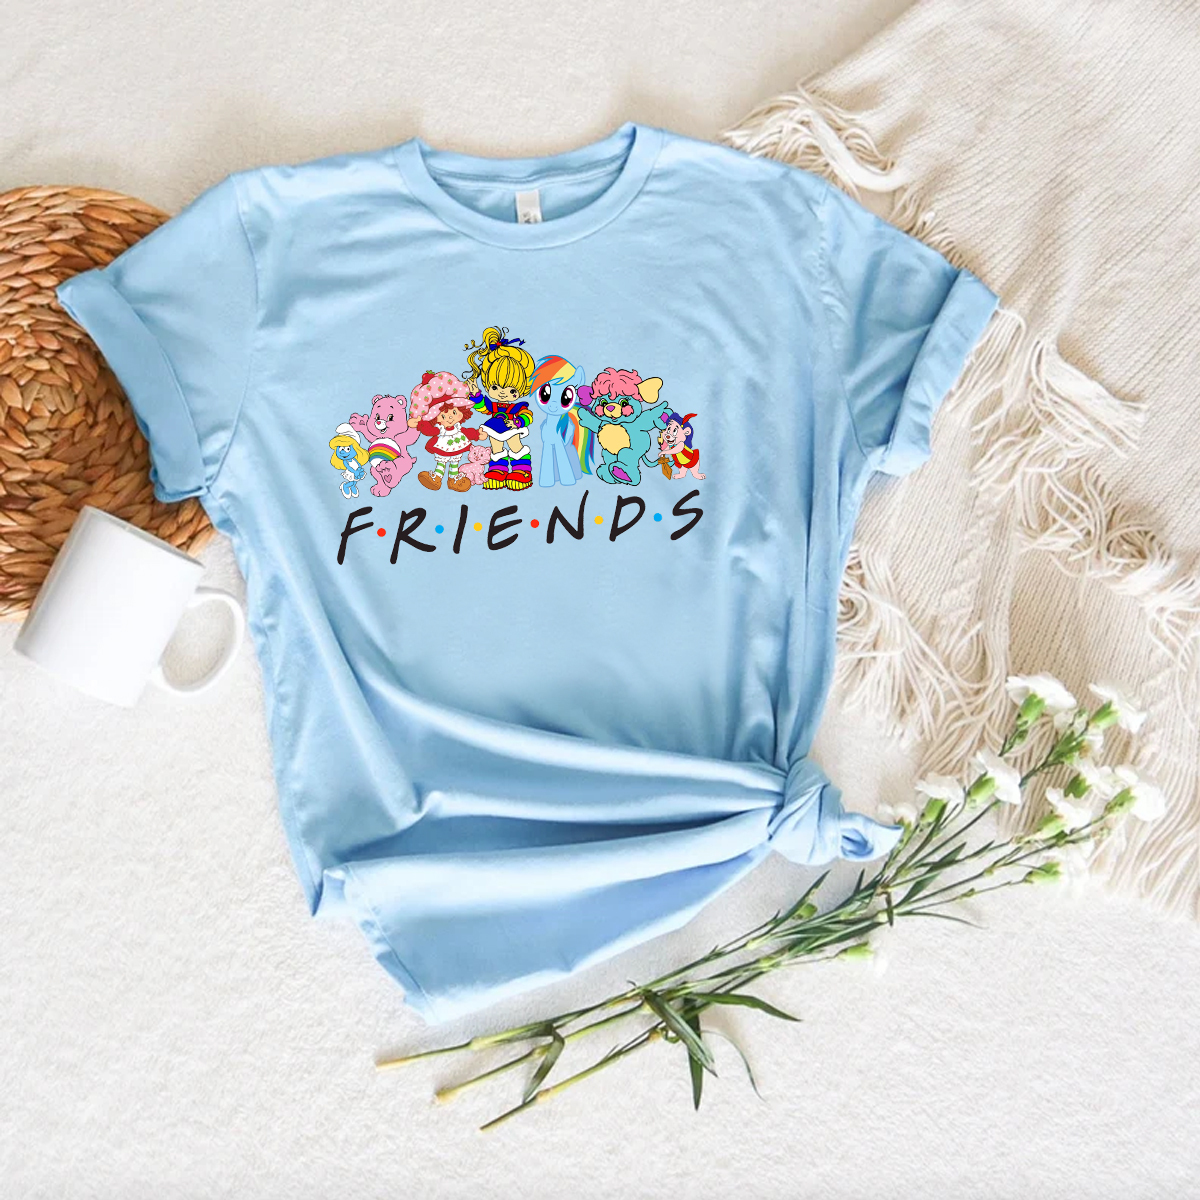 Personalized Friends of the 80ss Character mix Shirt, 80s Cartoon Friends Cartoon shirt, Friends Nostalgia Friends of the 80`s Matching Family T-Shirt